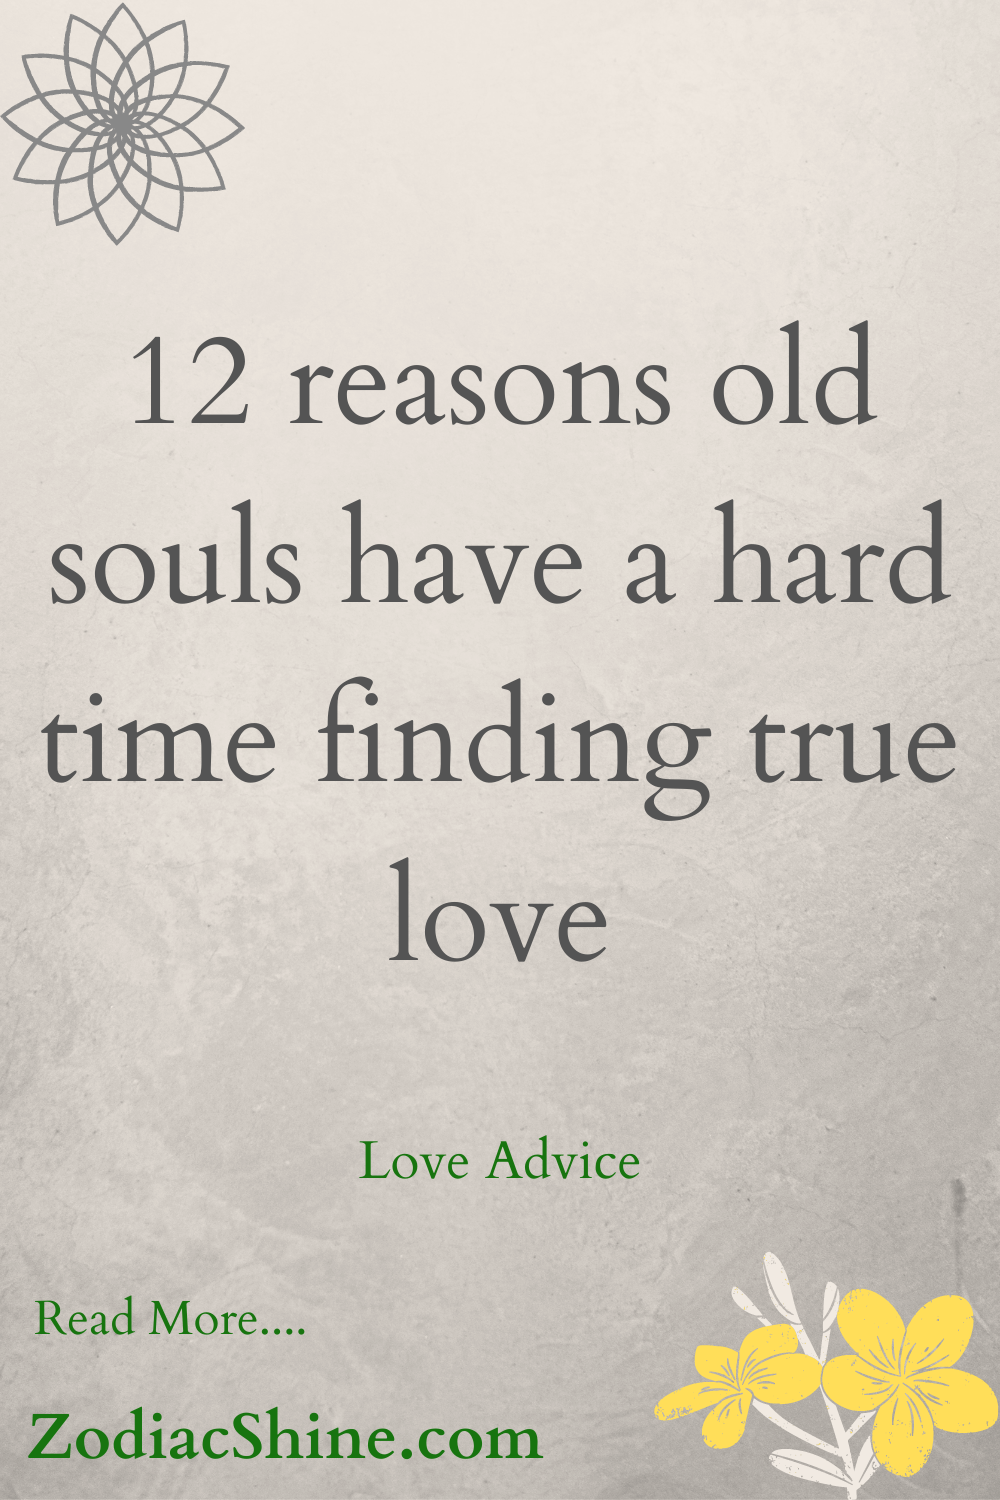 12 reasons old souls have a hard time finding true love